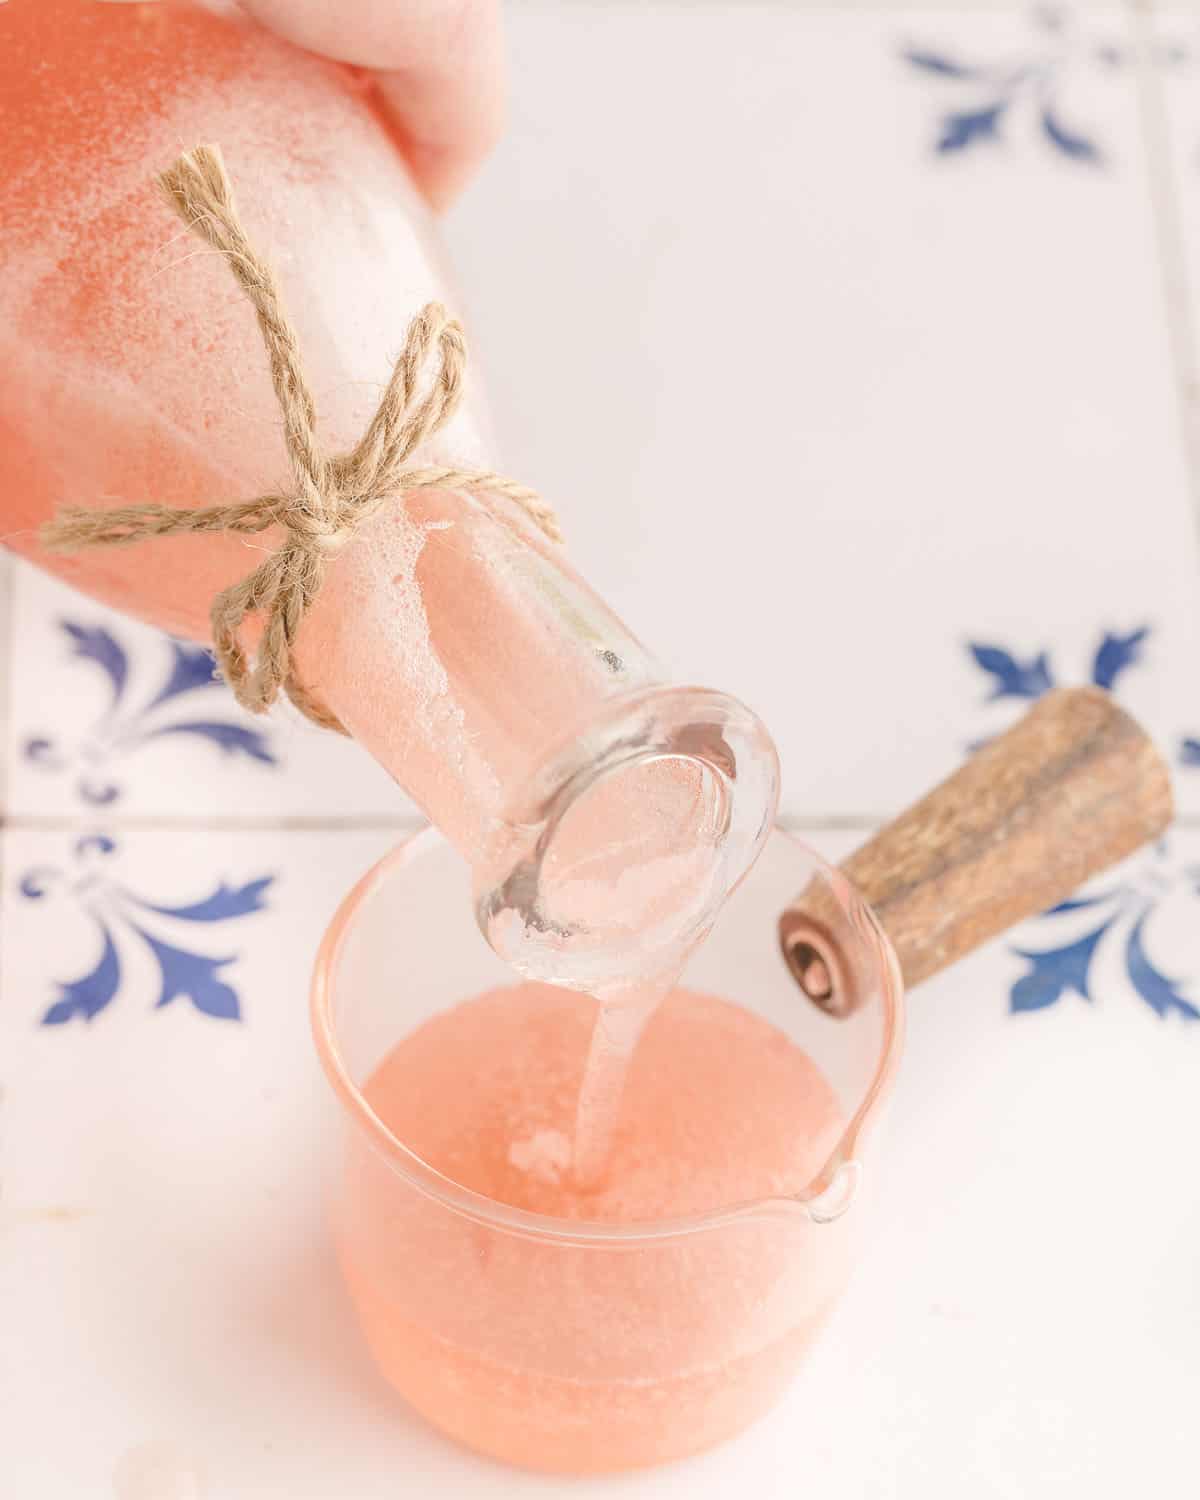 Pink rhubarb syrup pouring into a glass along with a cocktail mix, on a white surface with blue designs. 